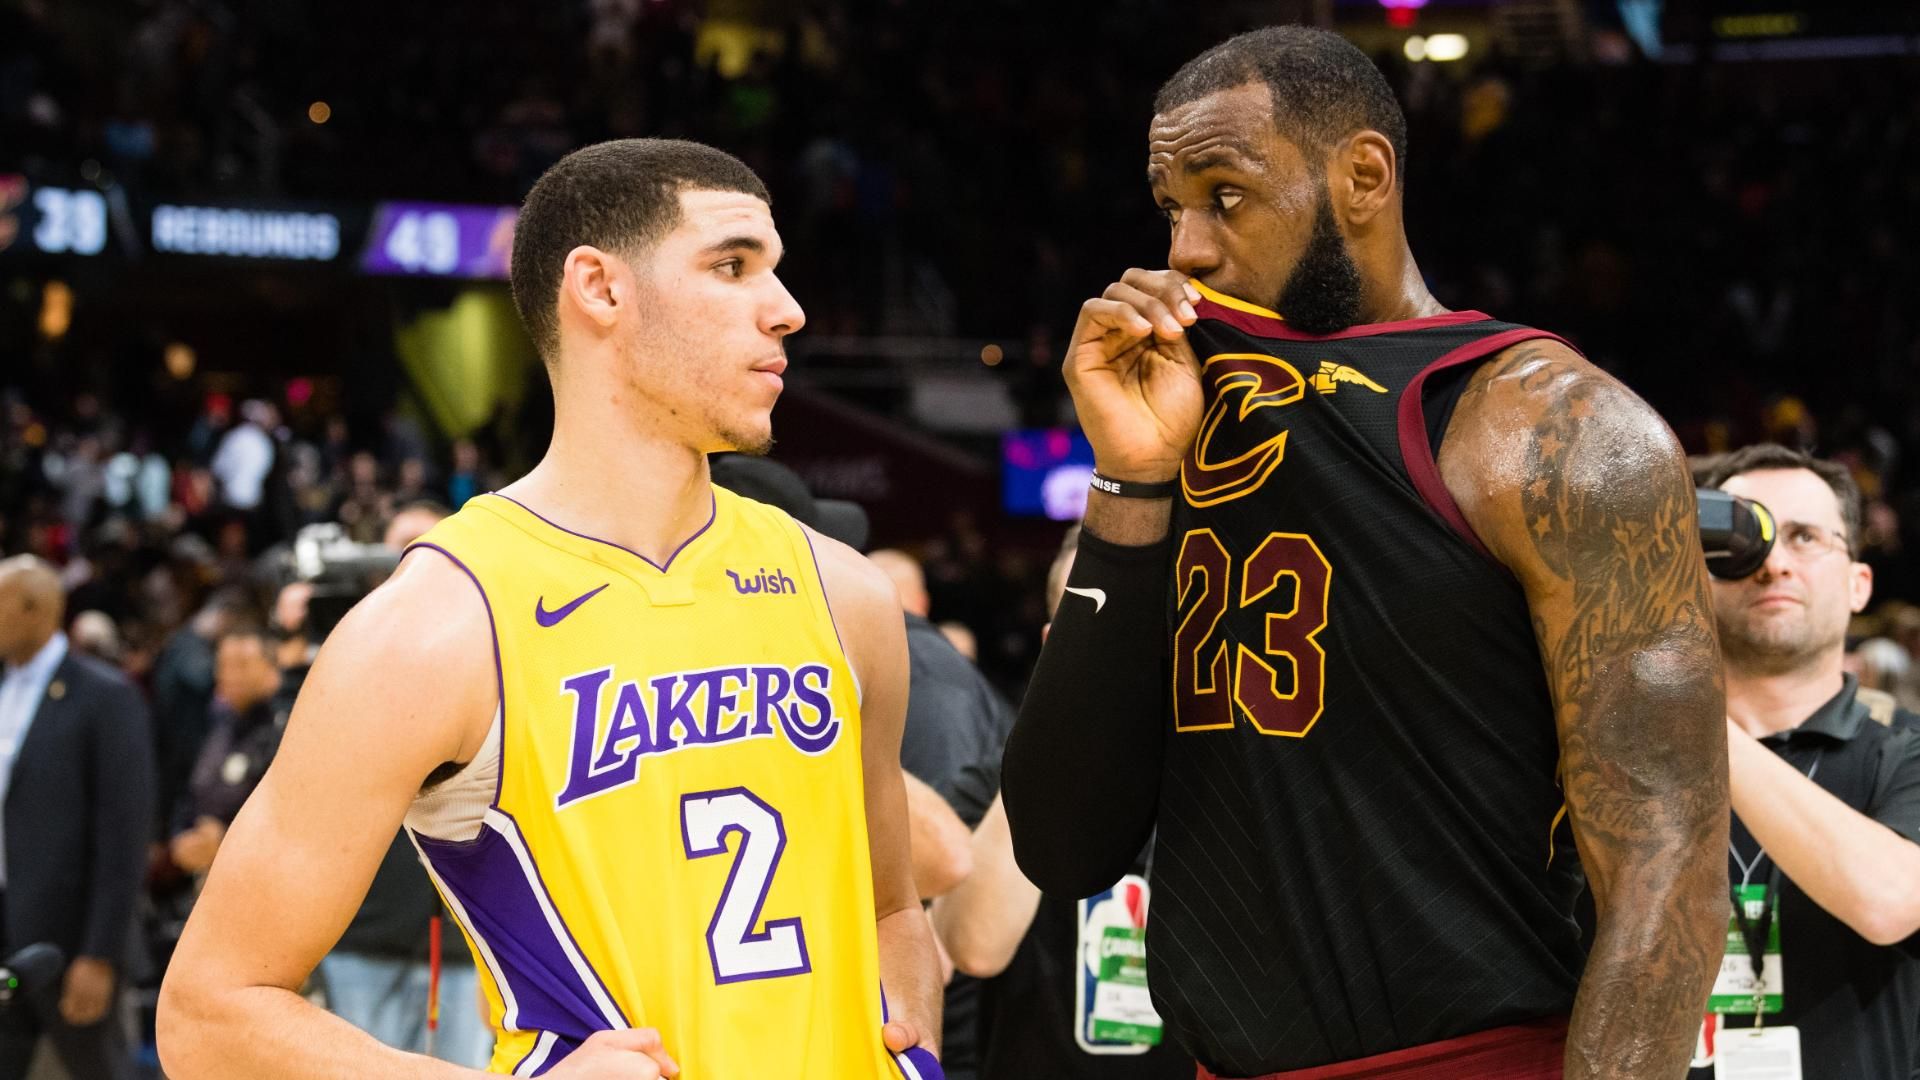 LeBron James grew up idolizing Magic Johnson and is excited to